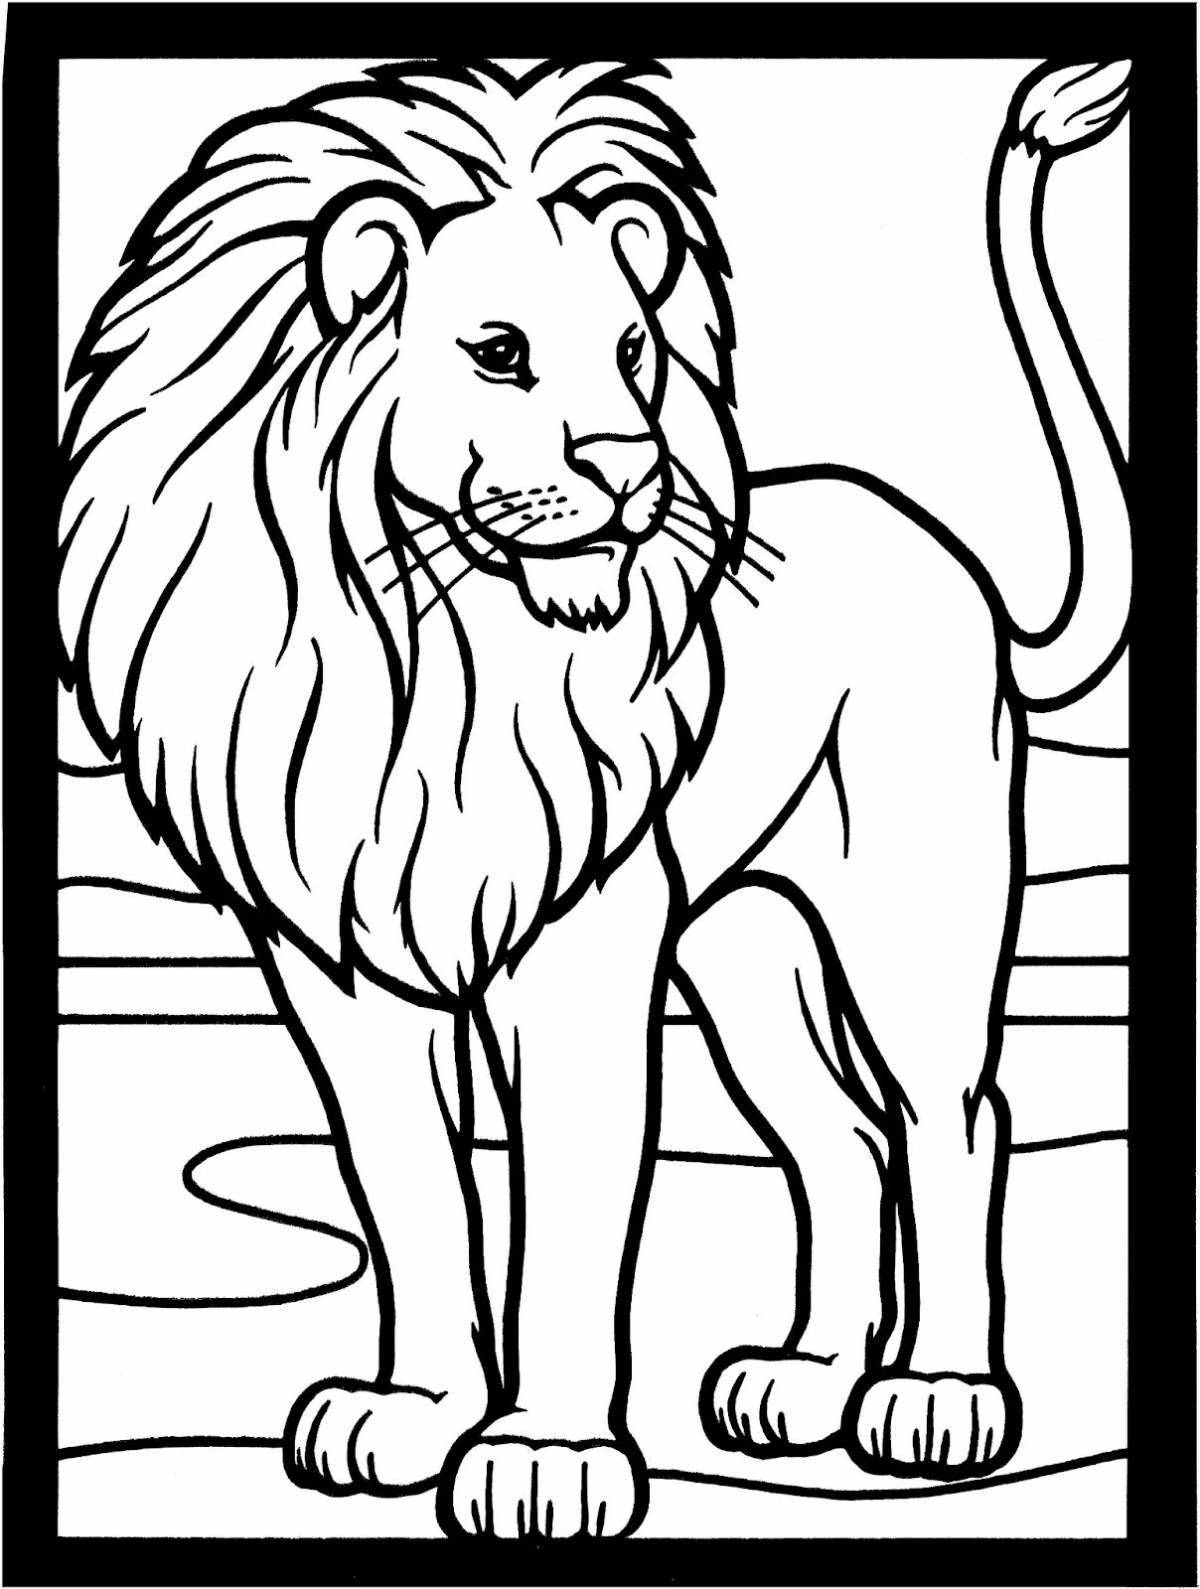 Exquisite lion coloring book for 3-4 year olds